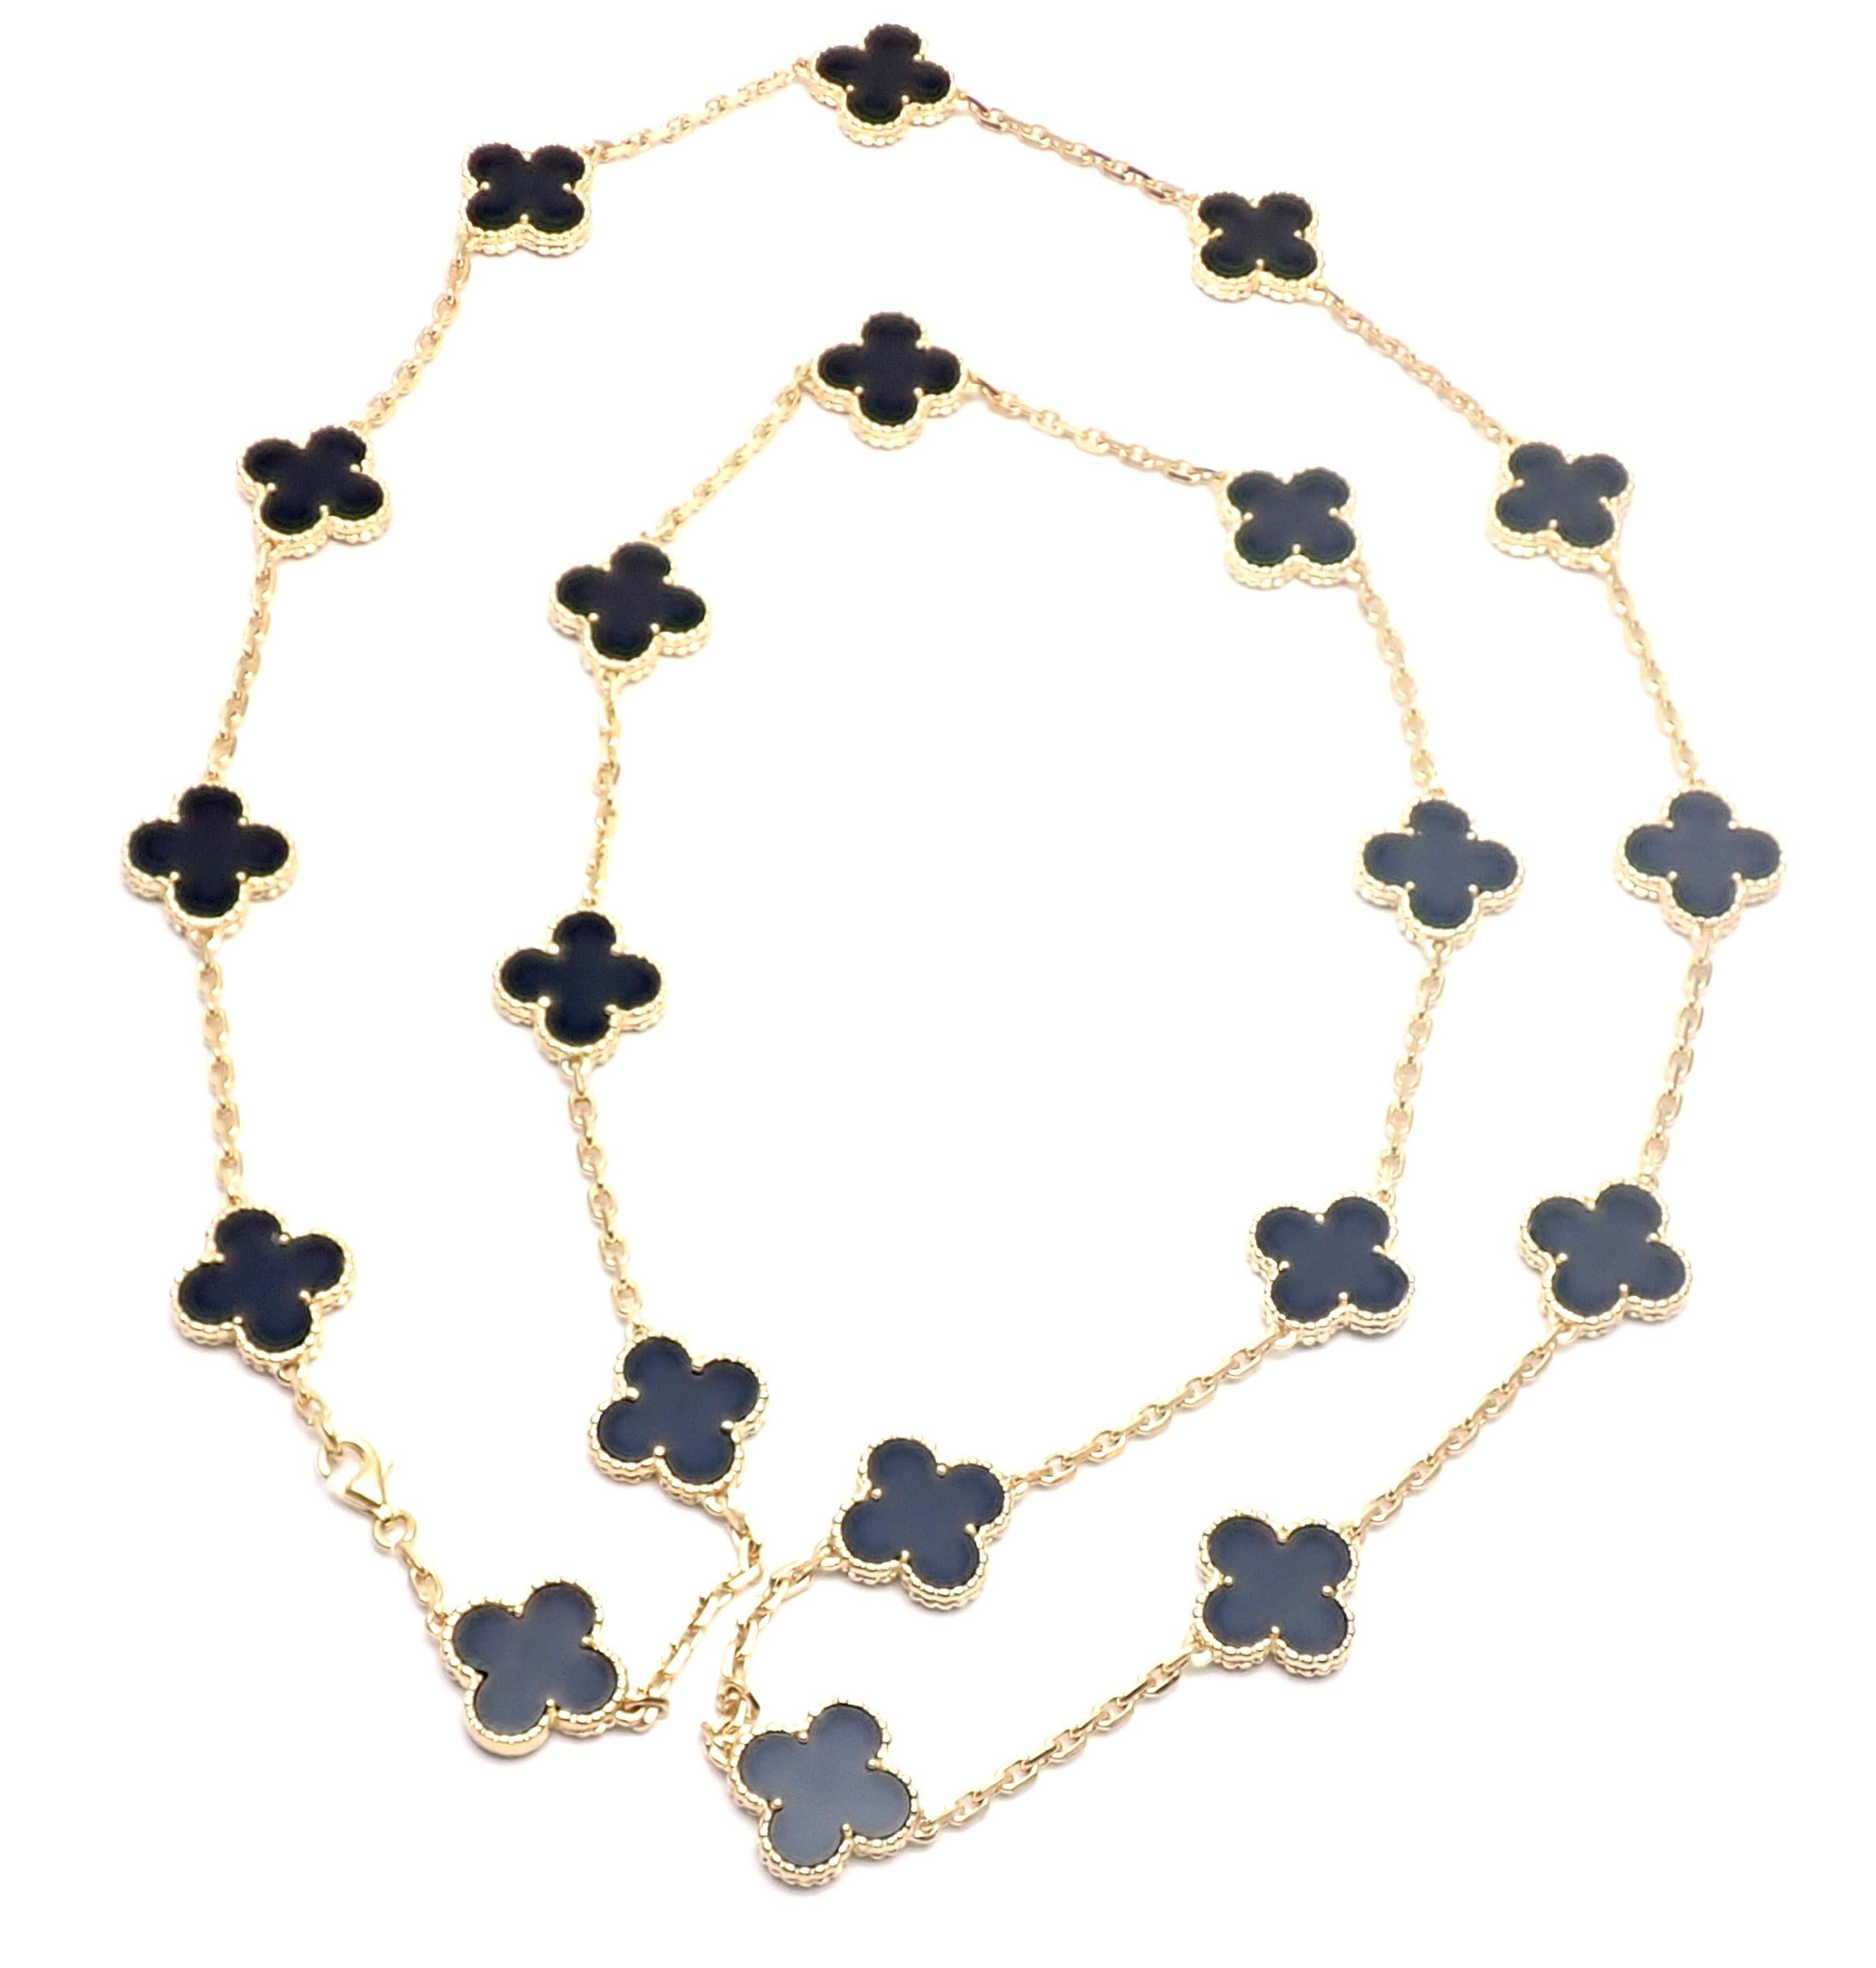 18k Yellow Gold Alhambra Twenty-Motif Black Onyx Necklace by  Van Cleef & Arpels, 
with 20 motifs of black onyx Alhambra stones, 15mm each.
This necklace comes with Van Cleef & Arpels service paper from a store in Japan 
and a VCA box.  
Details: